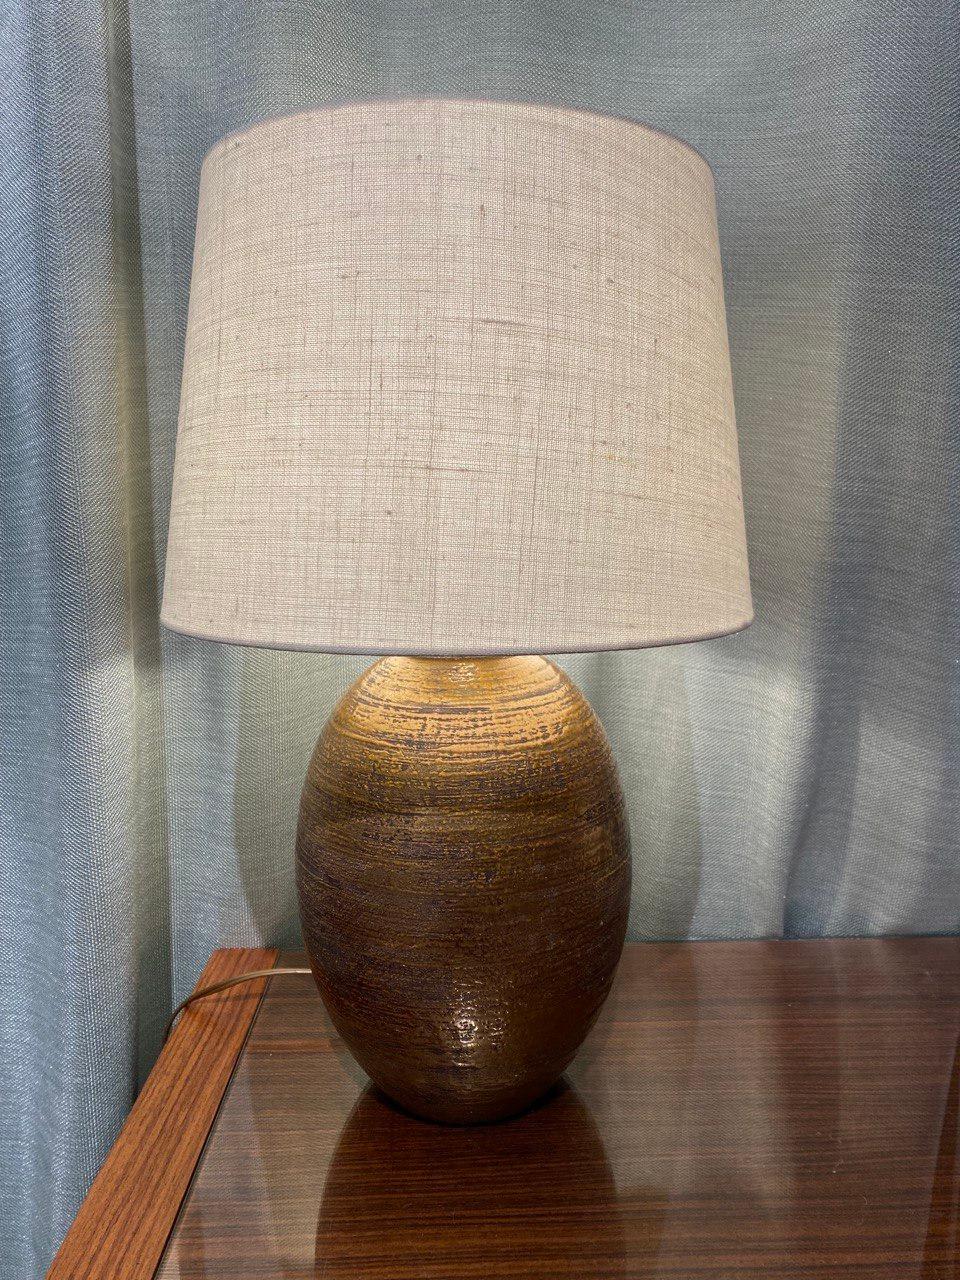 Ceramic very stylish table lamp by famous French studio KAZA from 1920s.
Marked under the base 